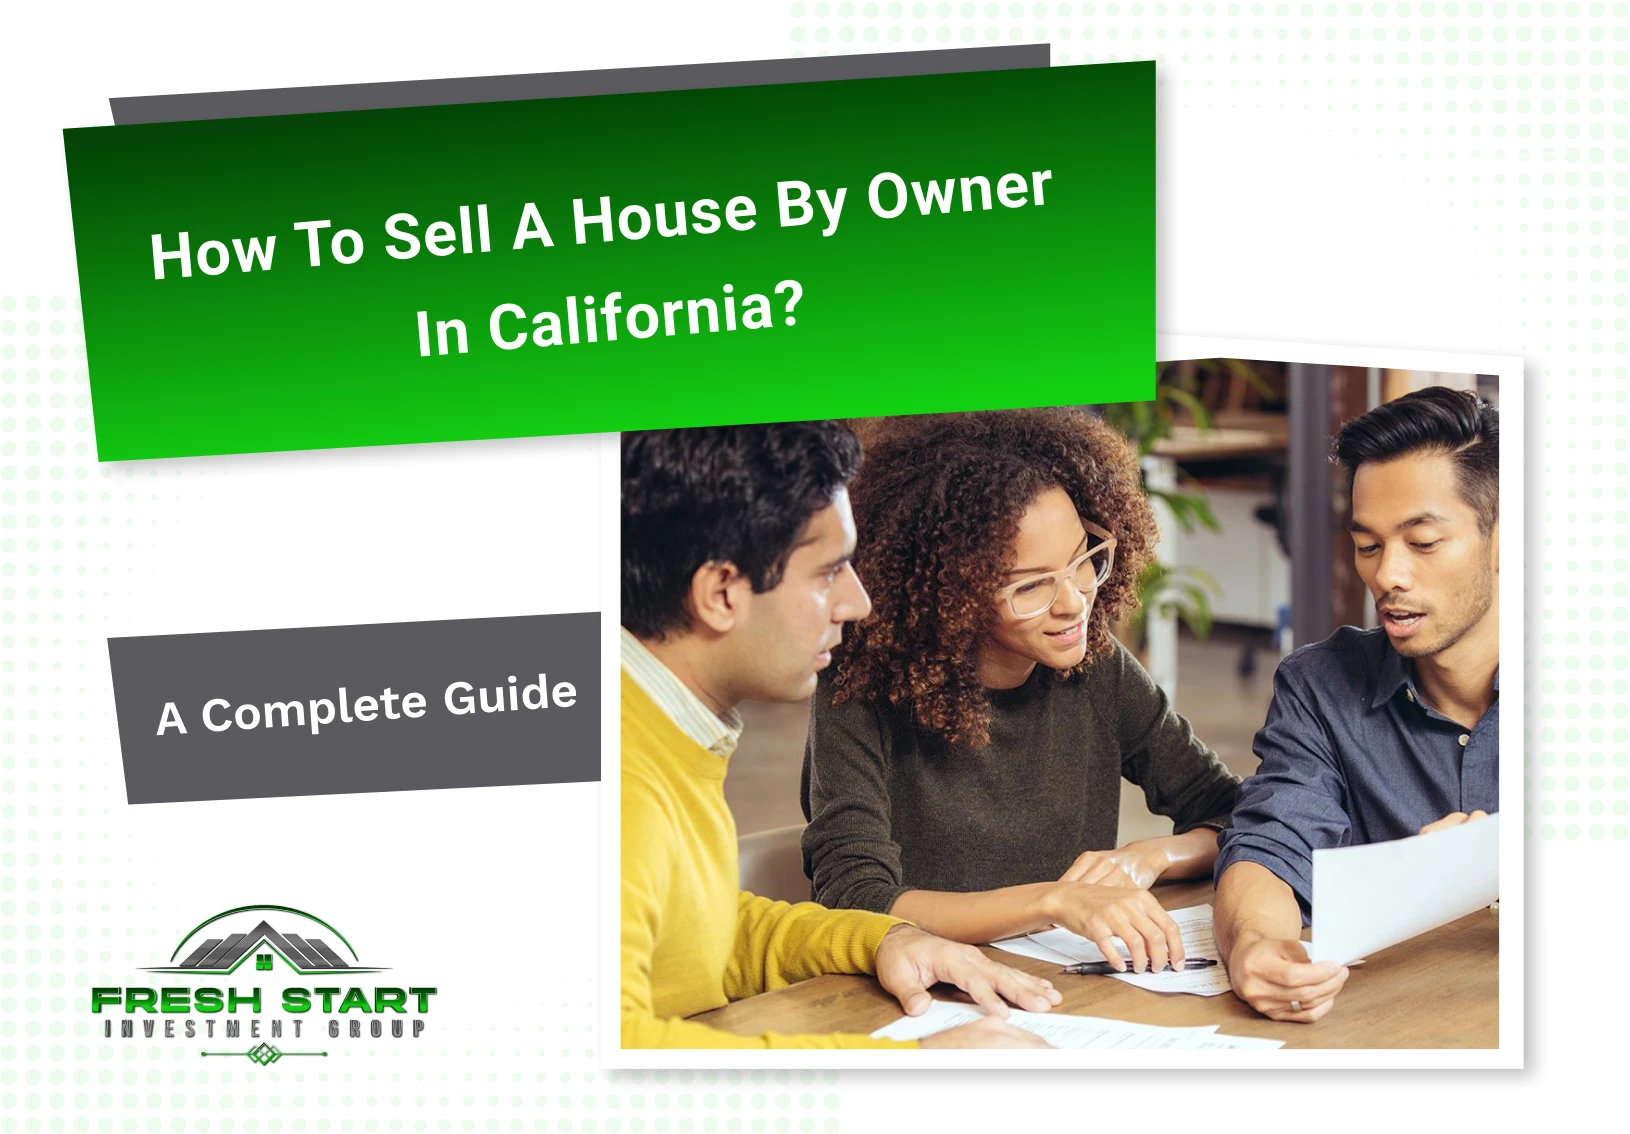 How to sell a house by owner in California?